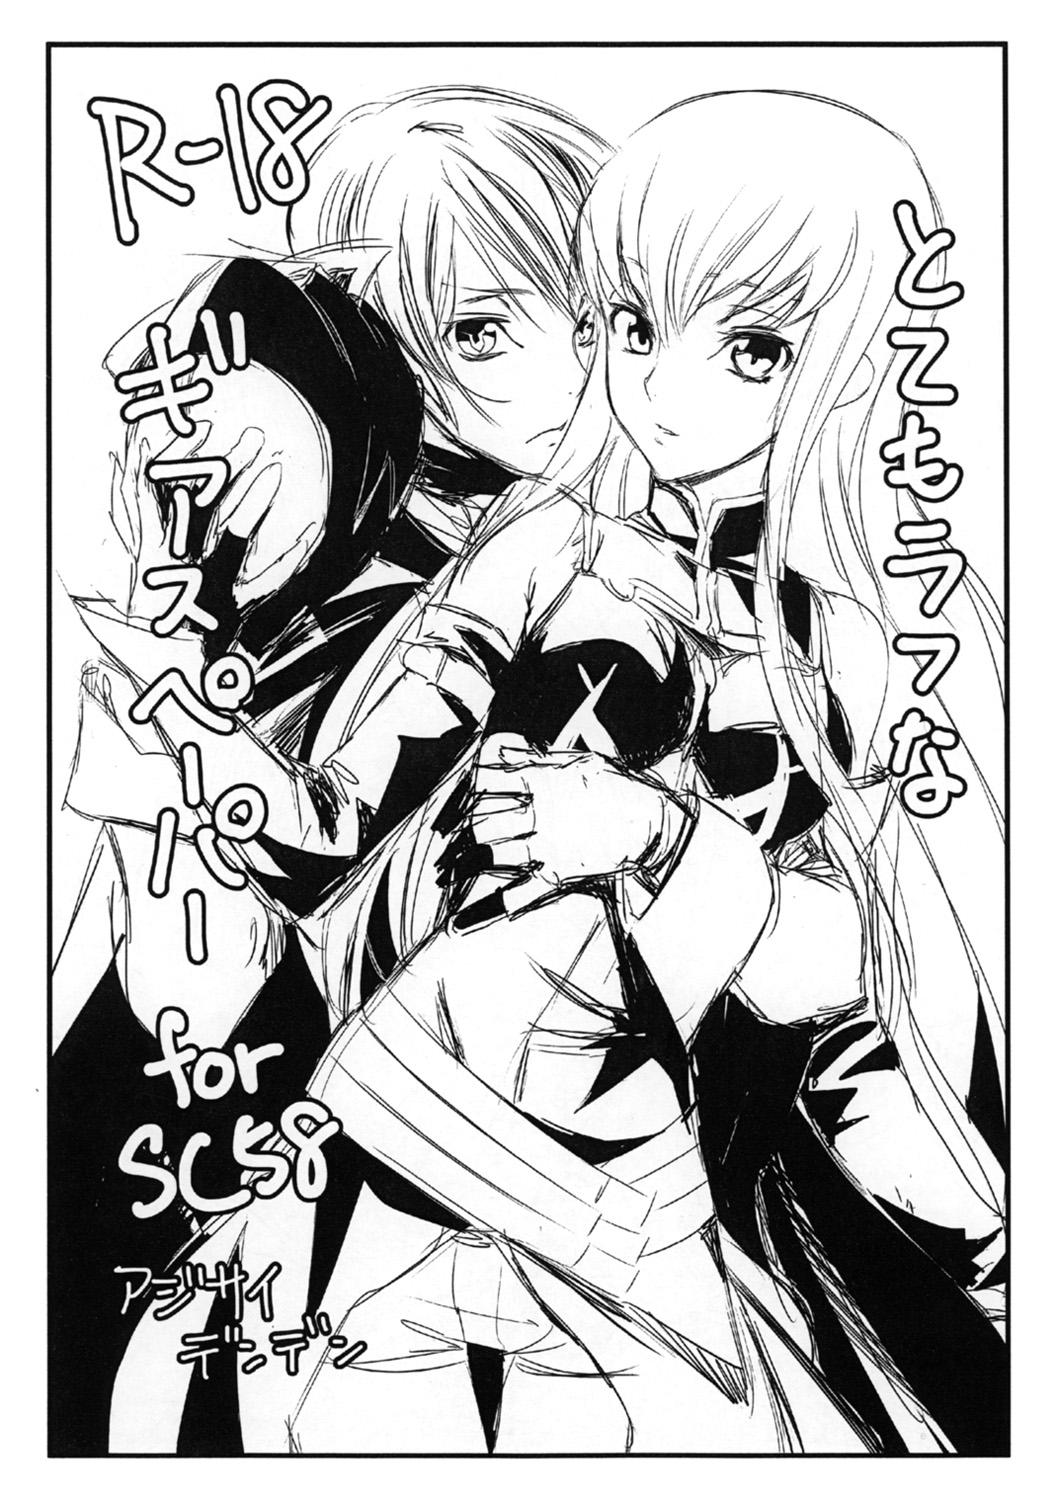 Hard Fuck Totemo Rough na Geass Paper for SC58 - Code geass Bear - Page 1